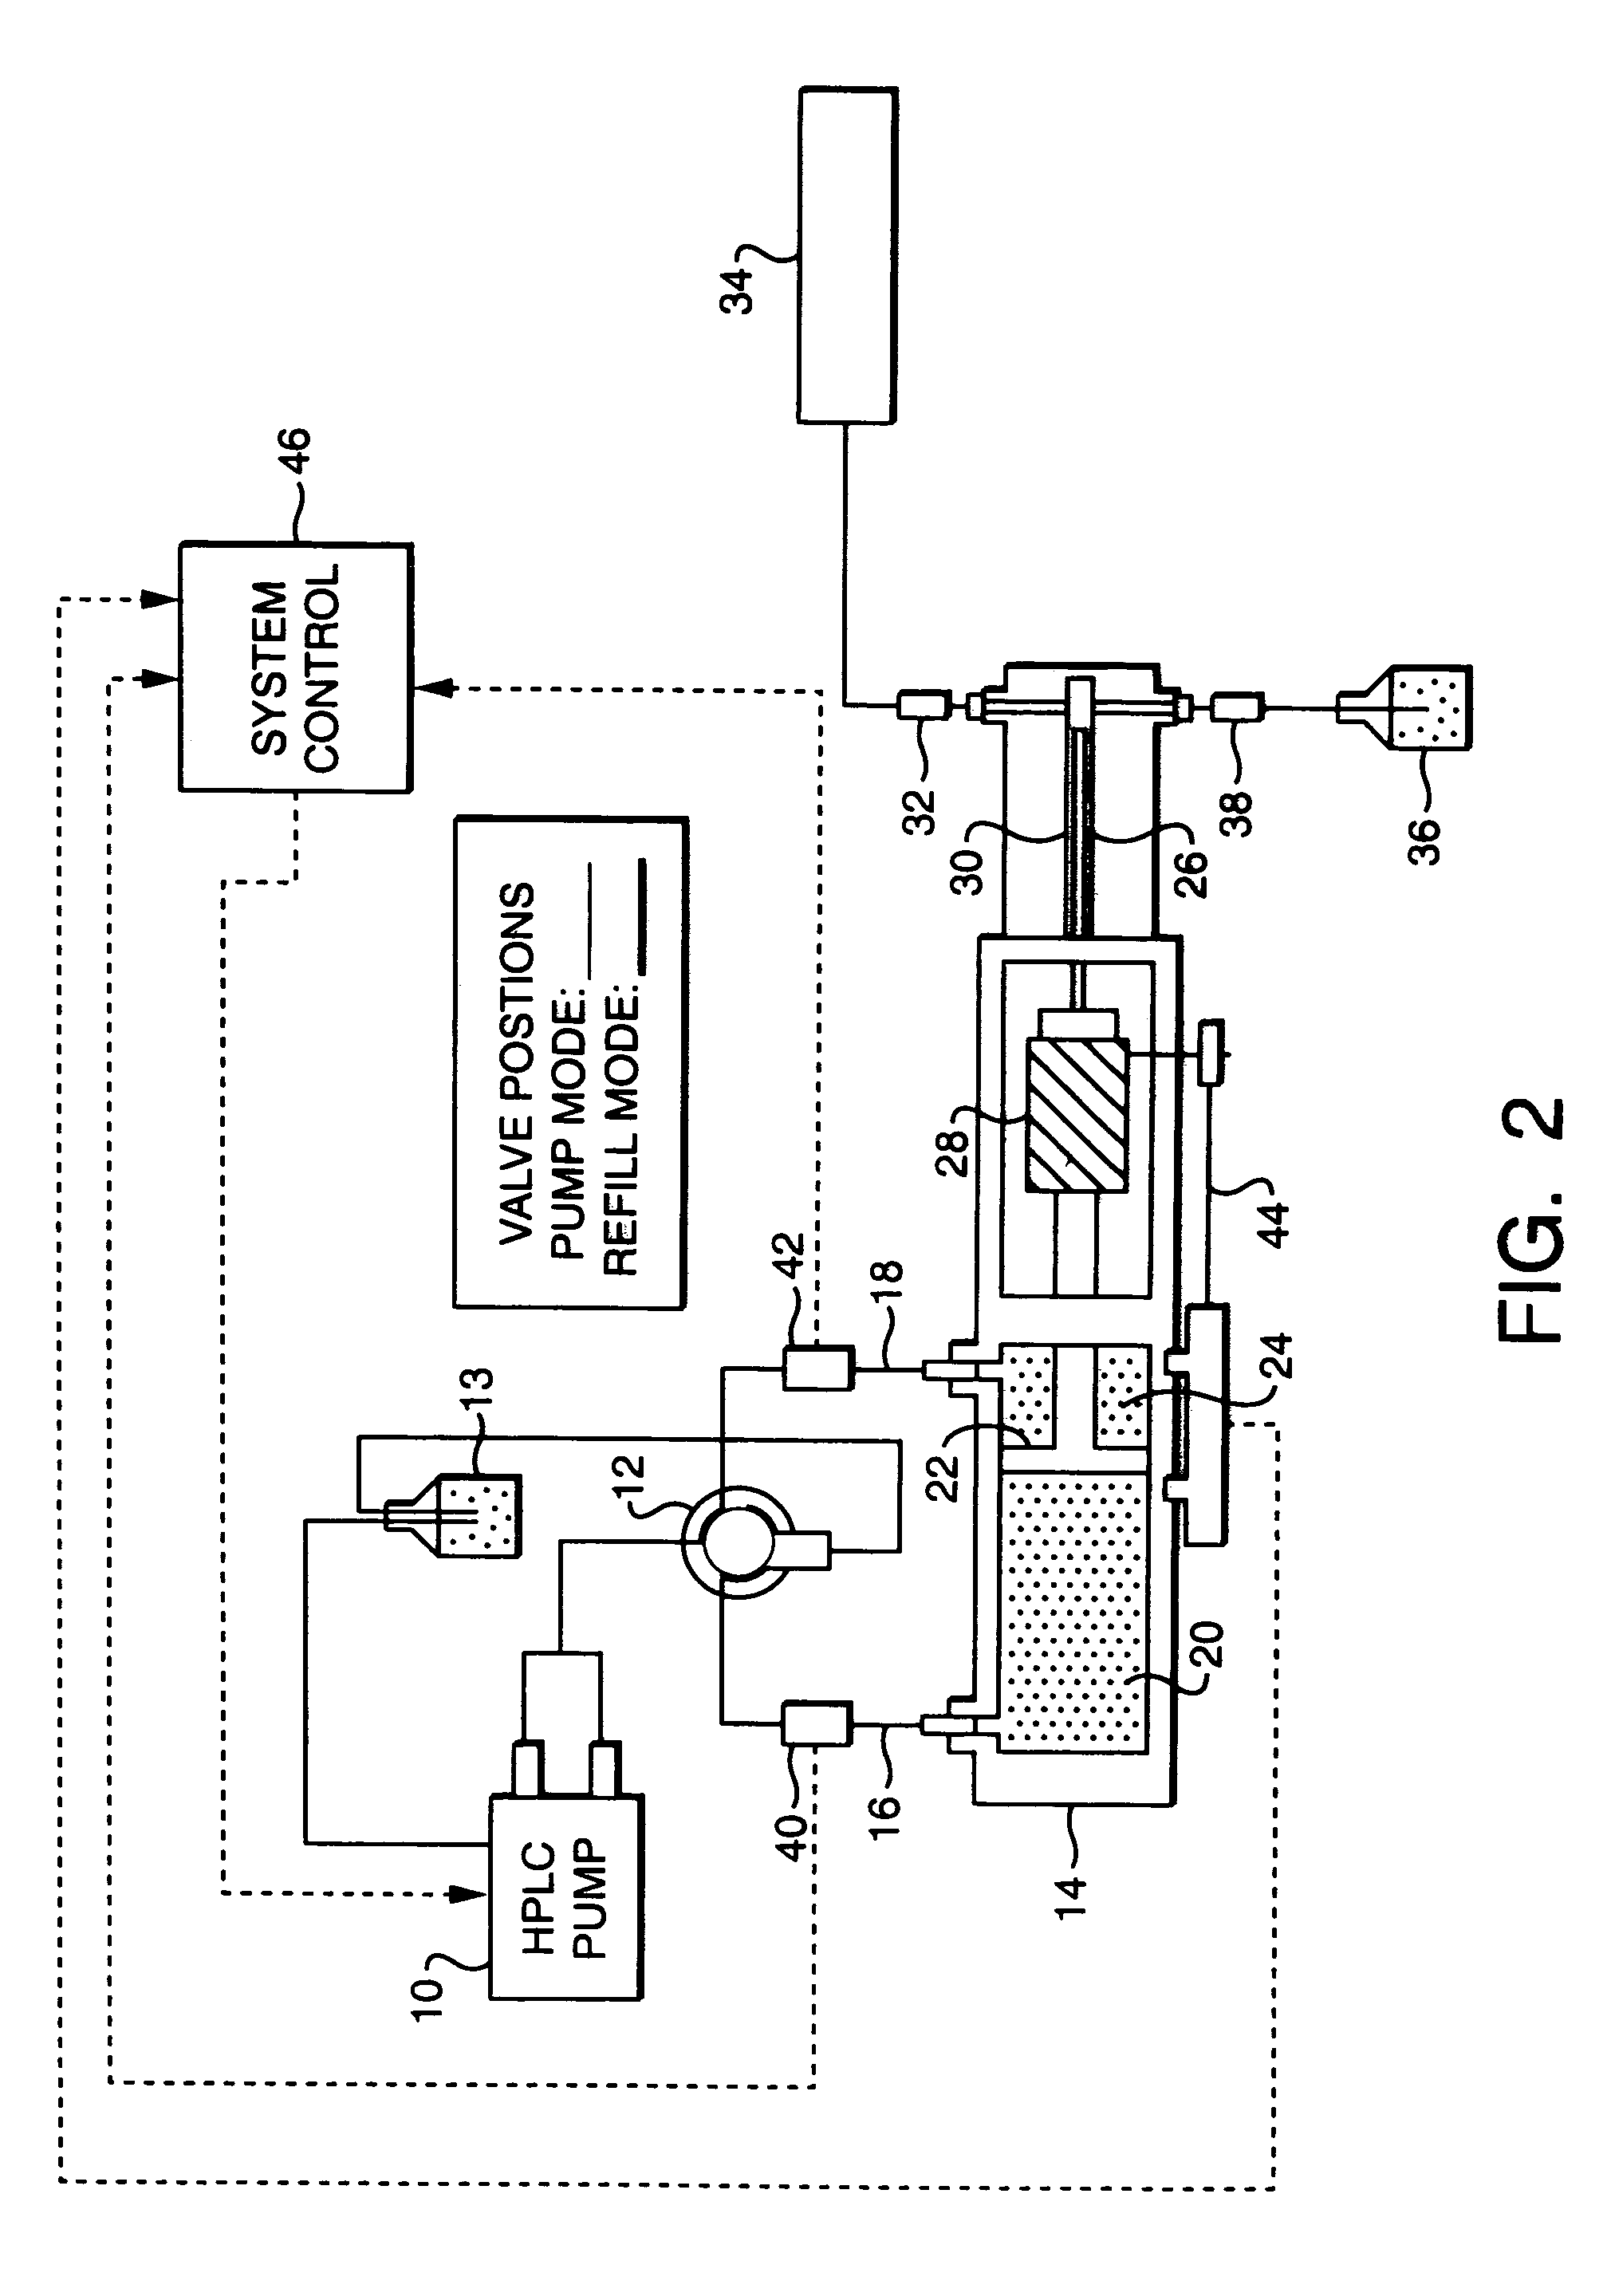 Method for using a hydraulic amplifier pump in ultrahigh pressure liquid chromatography